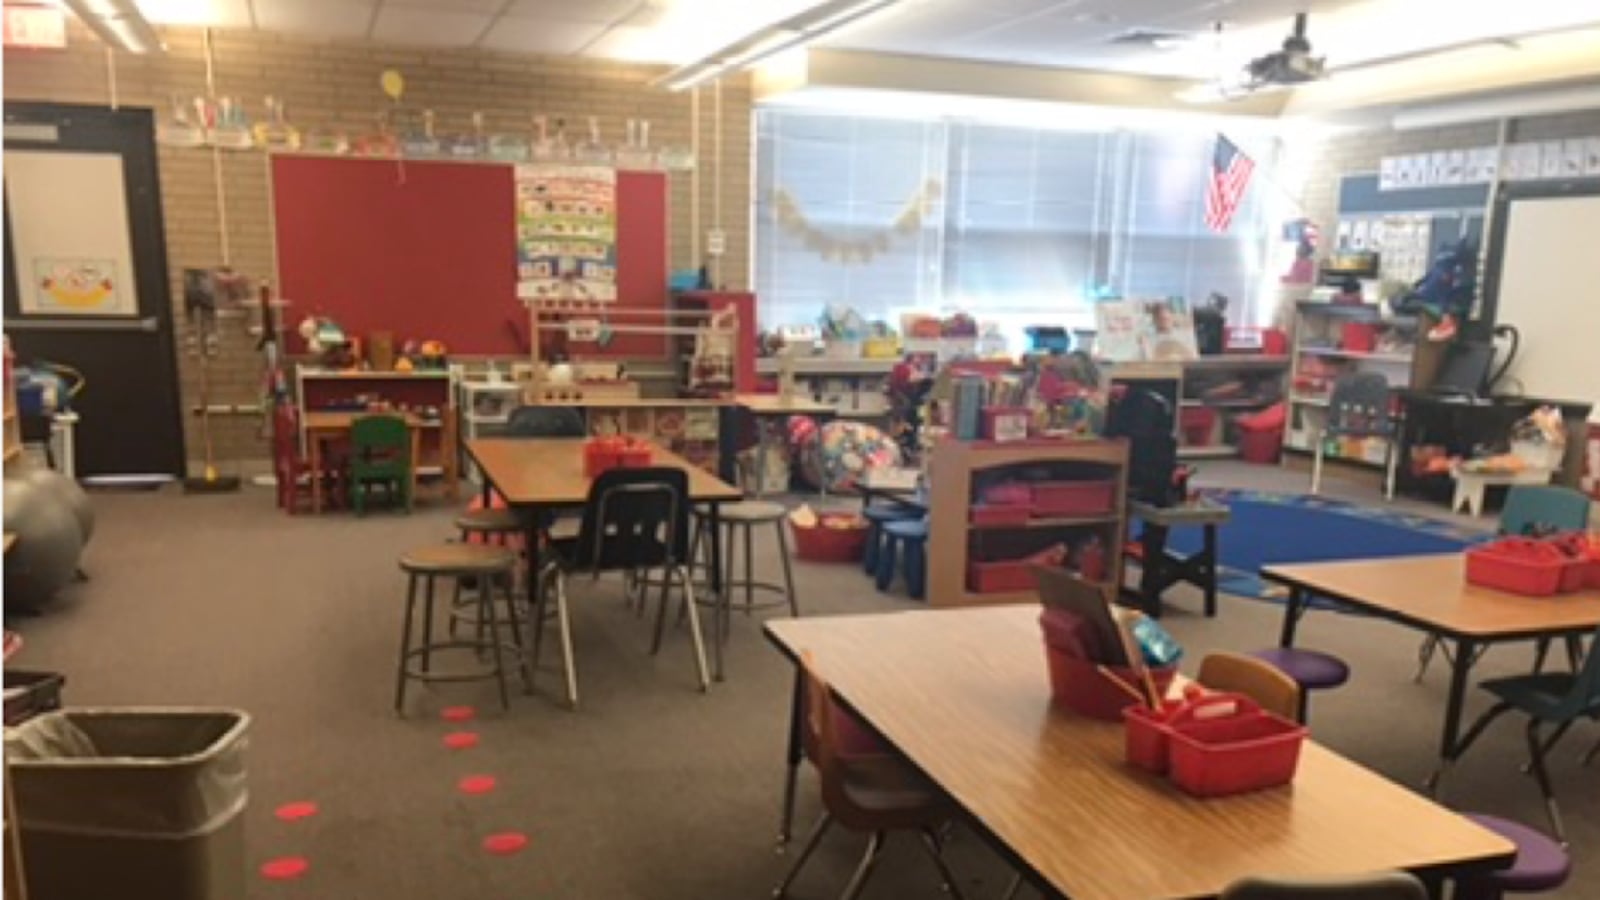 Aurora kindergarten teacher Laura Henry provided the pencil totes, floor dots, balls and wiggle seats, and everything you see on the shelves out of her own pocket.